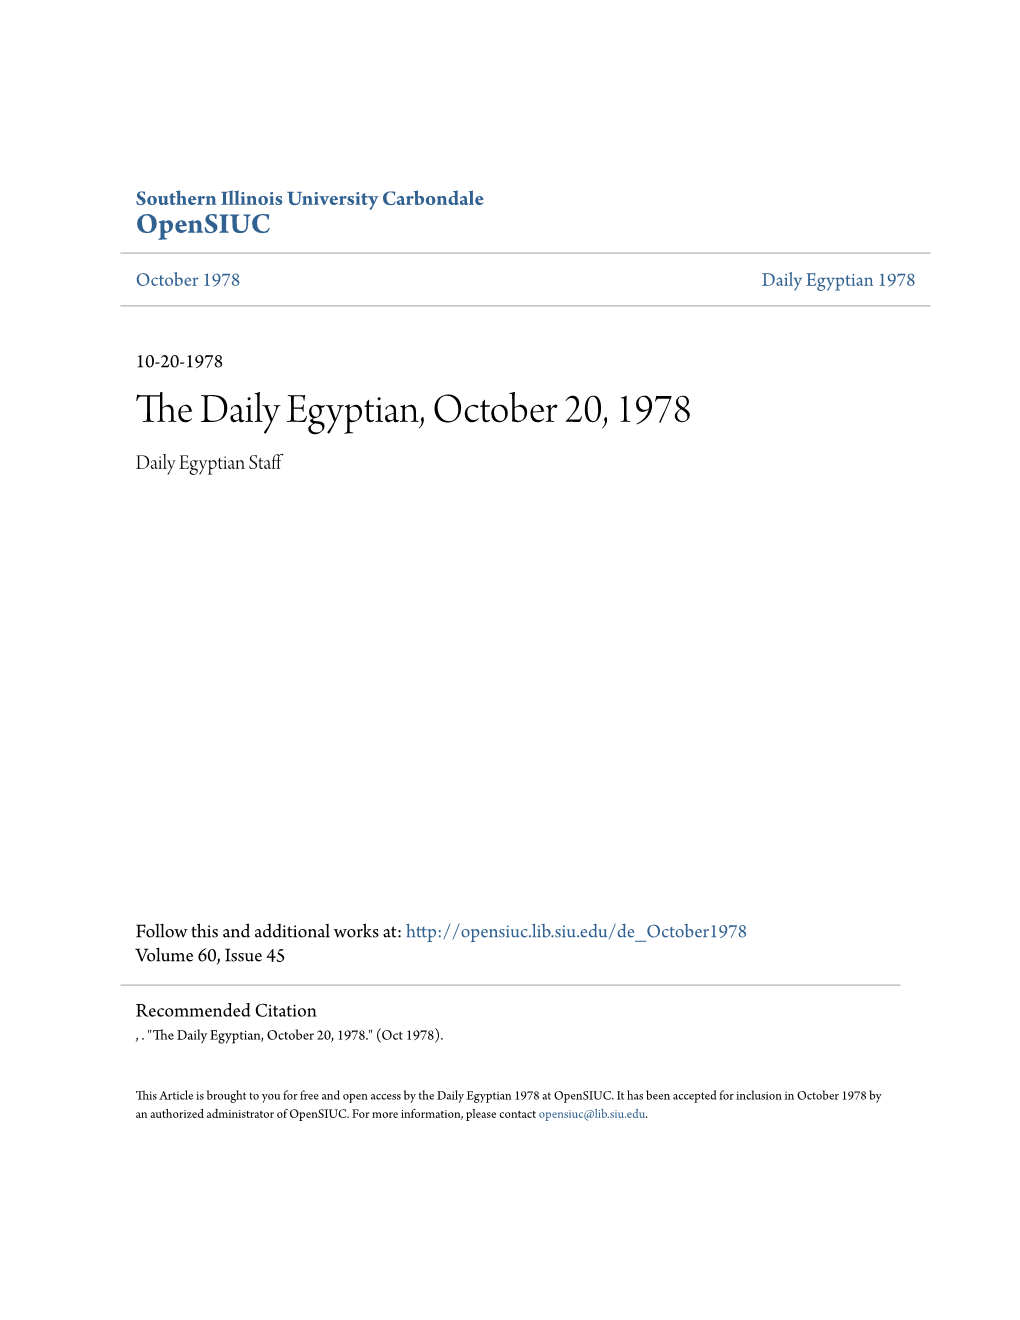 The Daily Egyptian, October 20, 1978